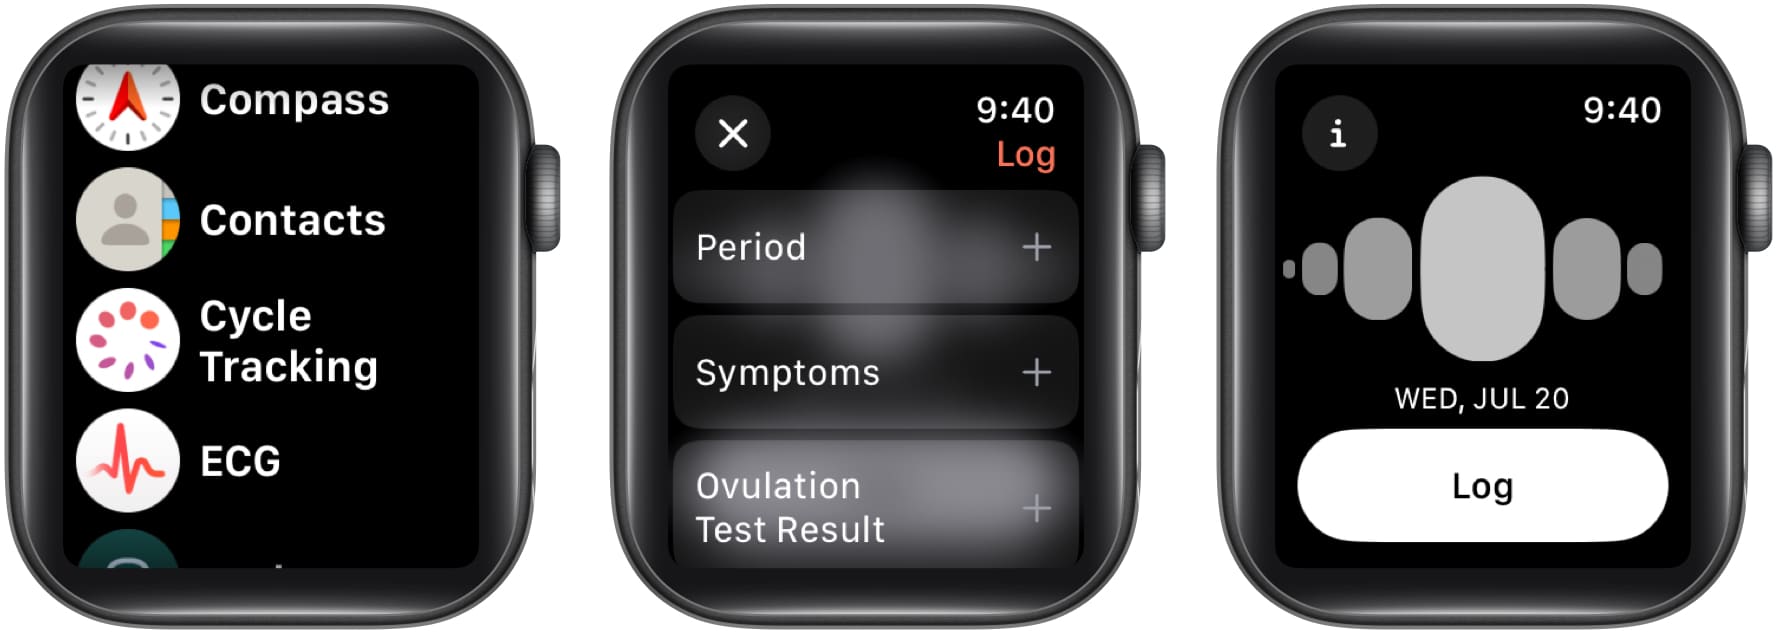 Select Cycle Tracking in the Health app, symptoms, and tap Log